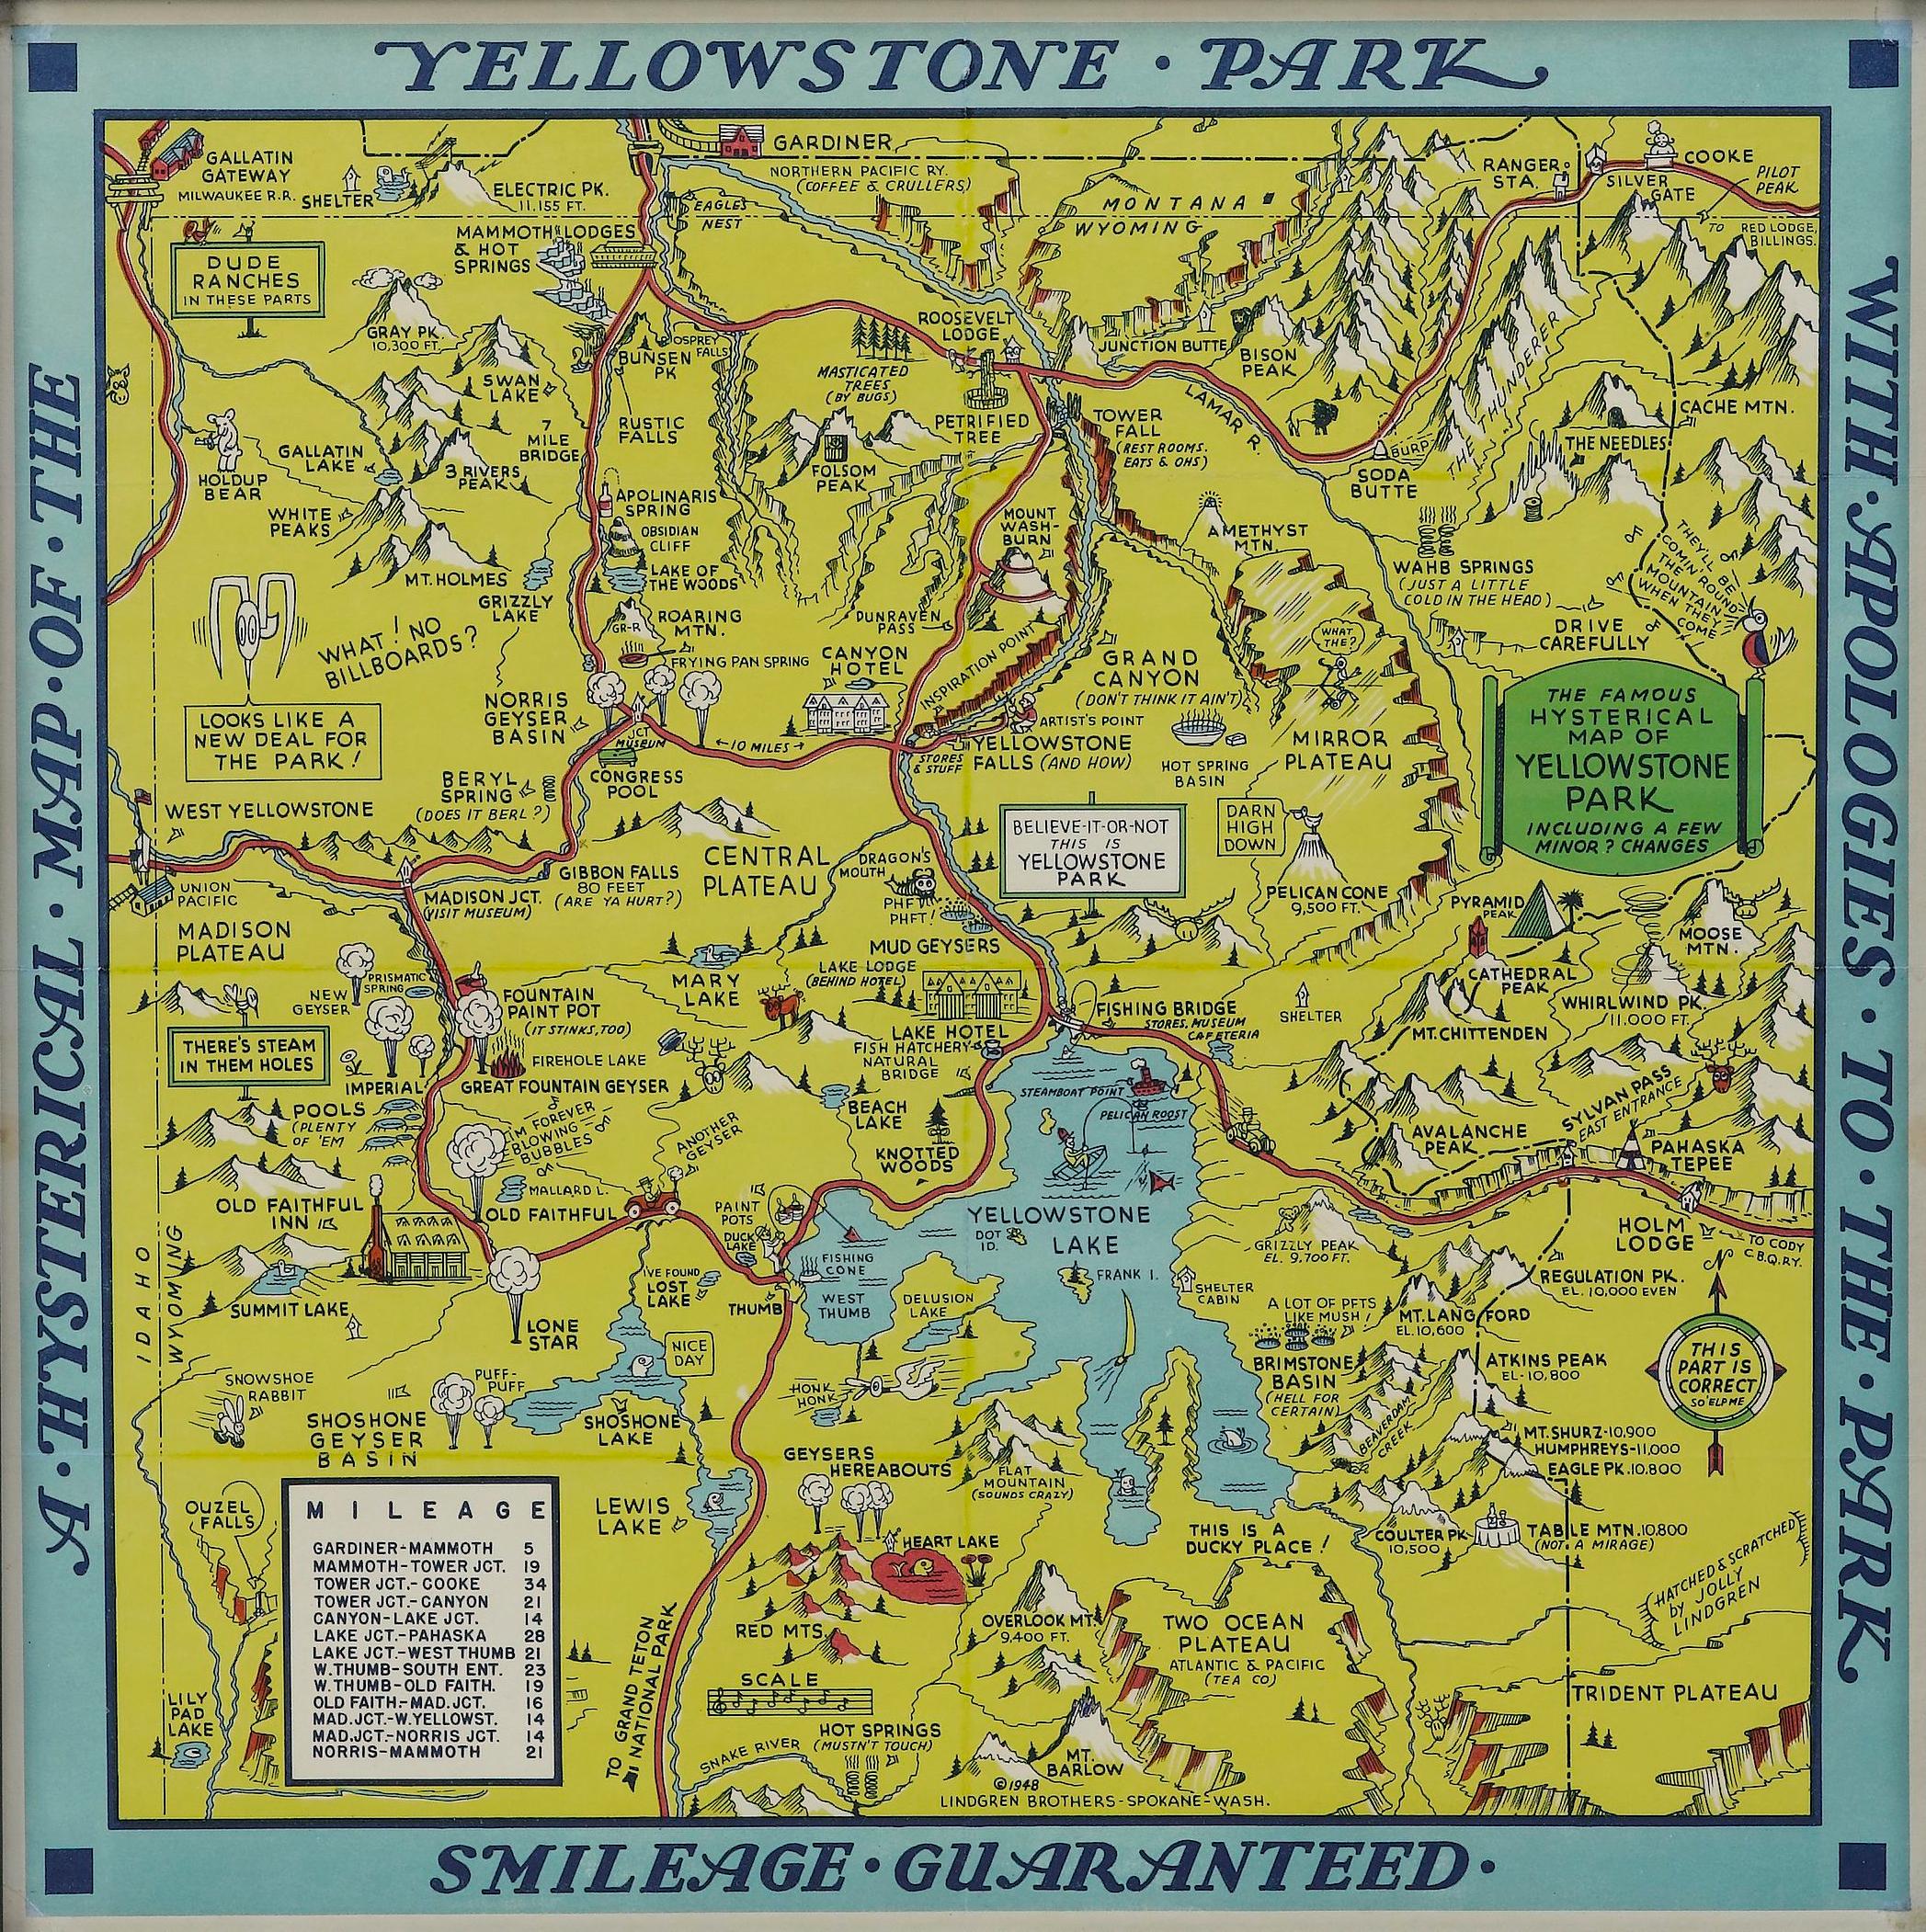 Presented is a second edition printing of Jolly Lindgren’s “Hysterical Map of Yellowstone National Park.” This comical pictorial map highlights the famous Yellowstone National Park. The map is labeled with geysers, mountains, lakes, and roads, but